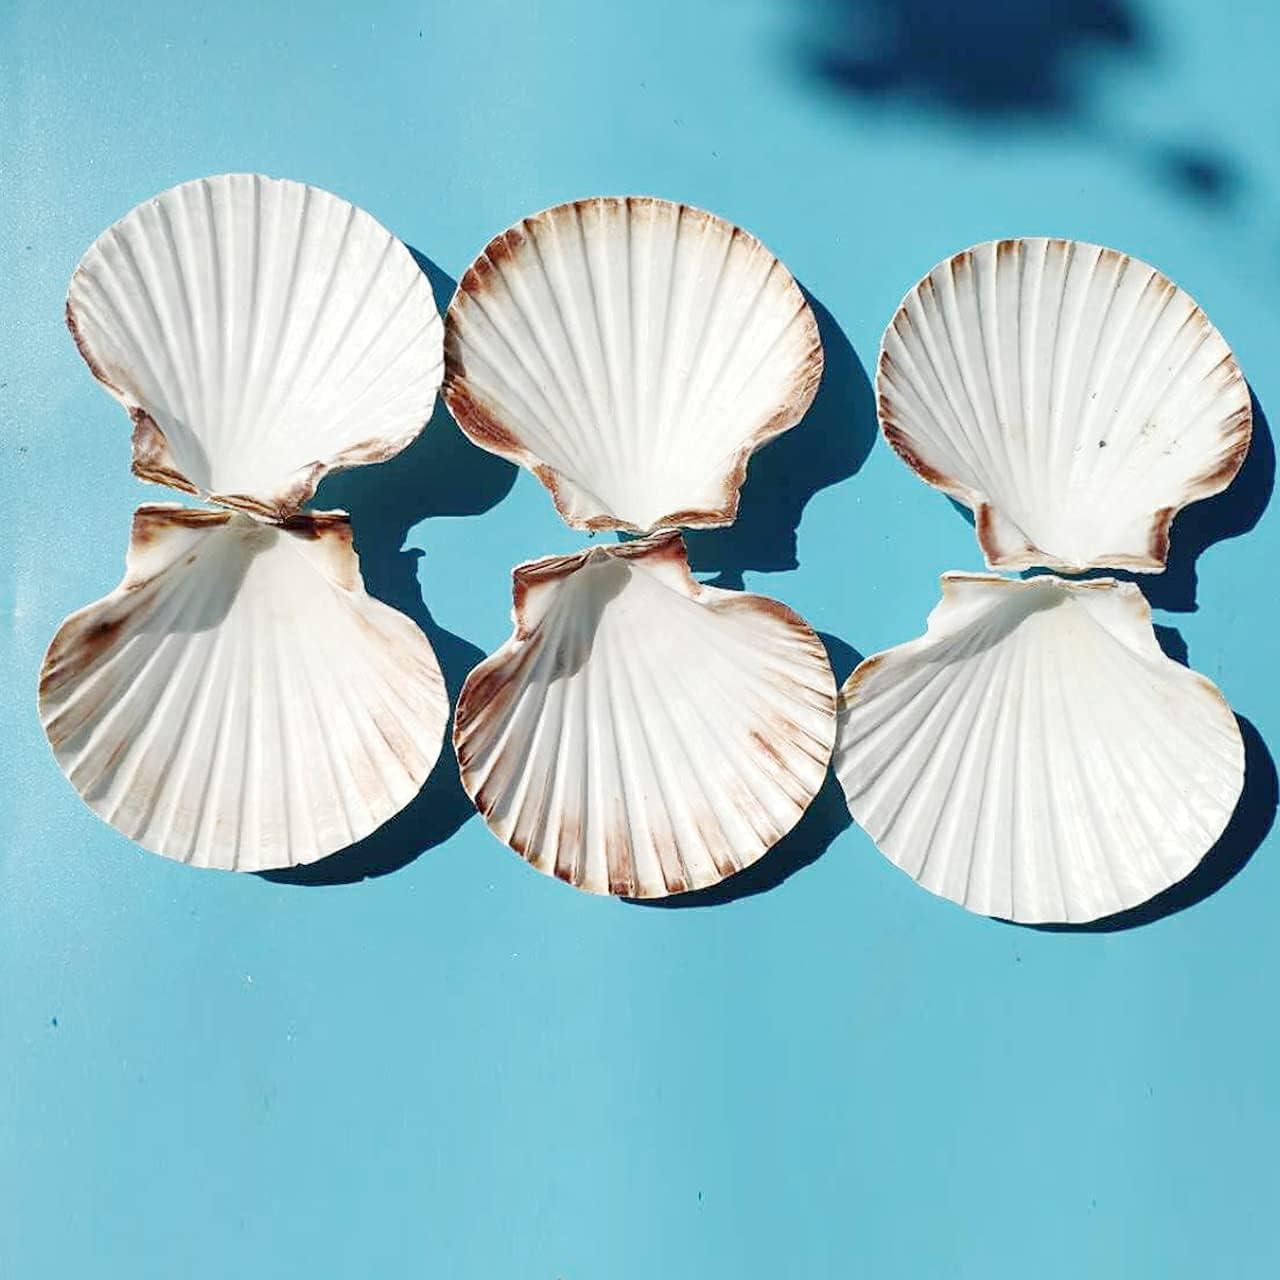 gopiter 6PCS Scallop Shells 4''-5'' Large White Sea Shells Crafts, Natural  sea Shell Decoration for Kitchen Baking, DIY Painting, Beach Party Wedding